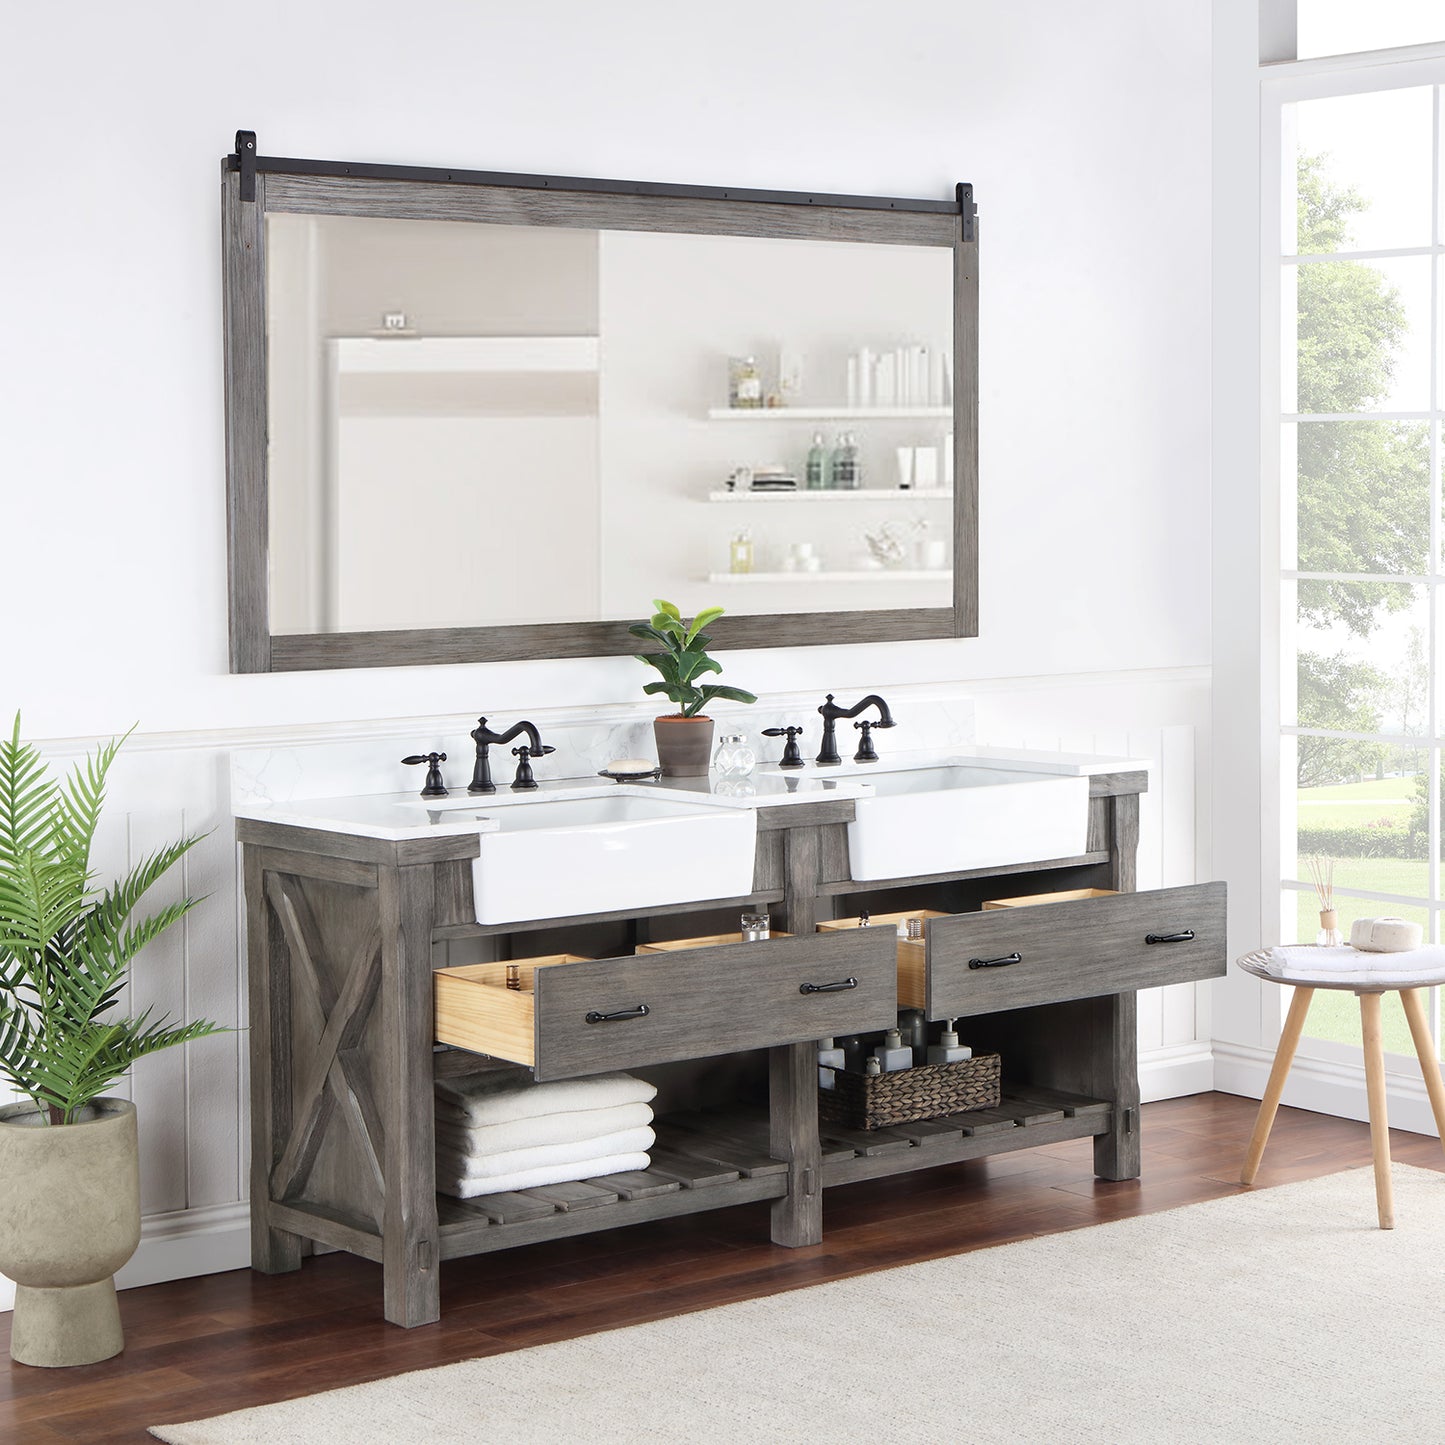 Villareal 72" Double Bath Vanity in Classical Grey with Composite Stone Top in White, White Farmhouse Basin and Mirror